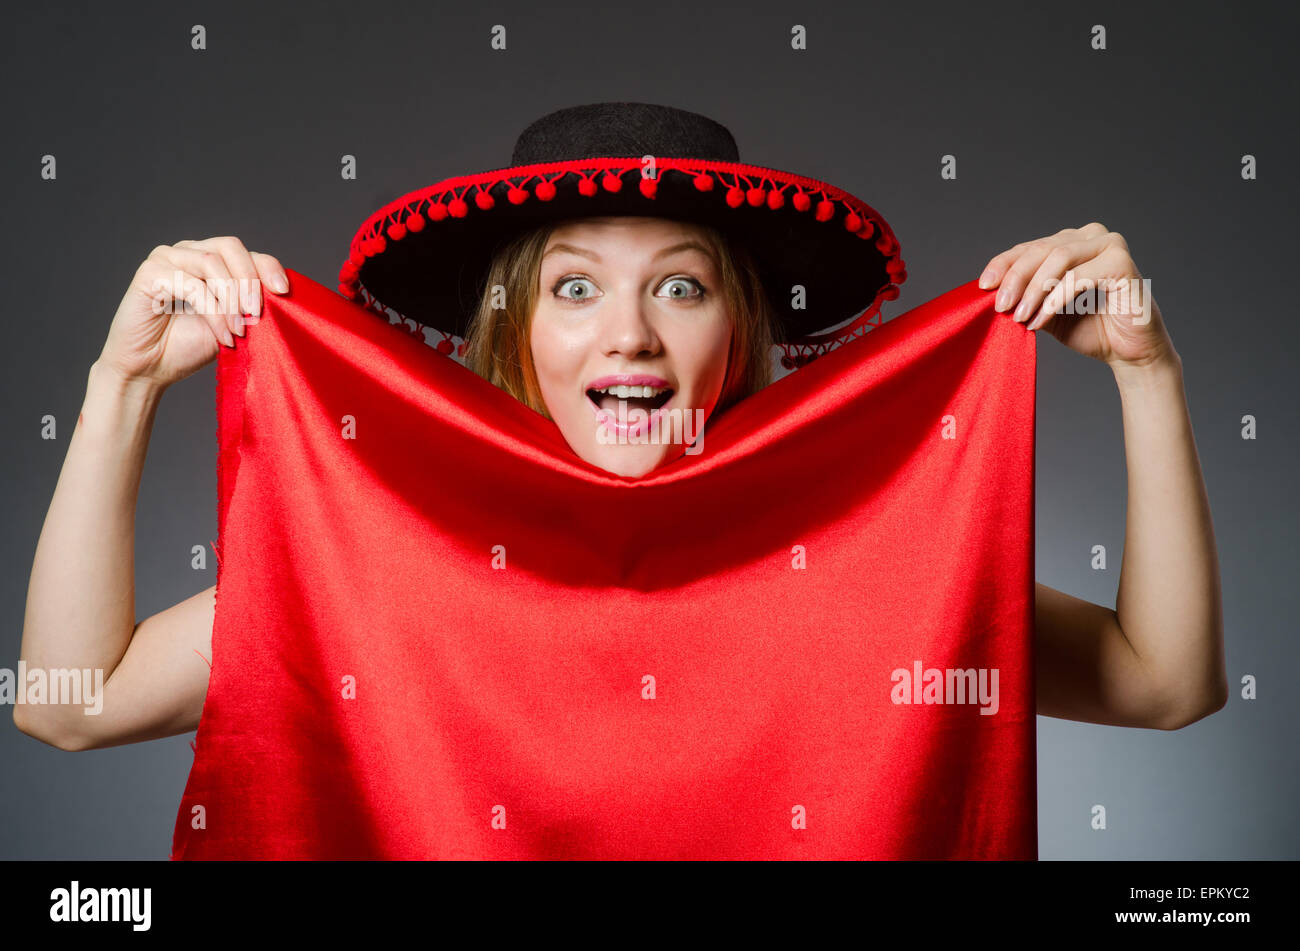 Woman wearing sombrero hat in funny concept Stock Photo